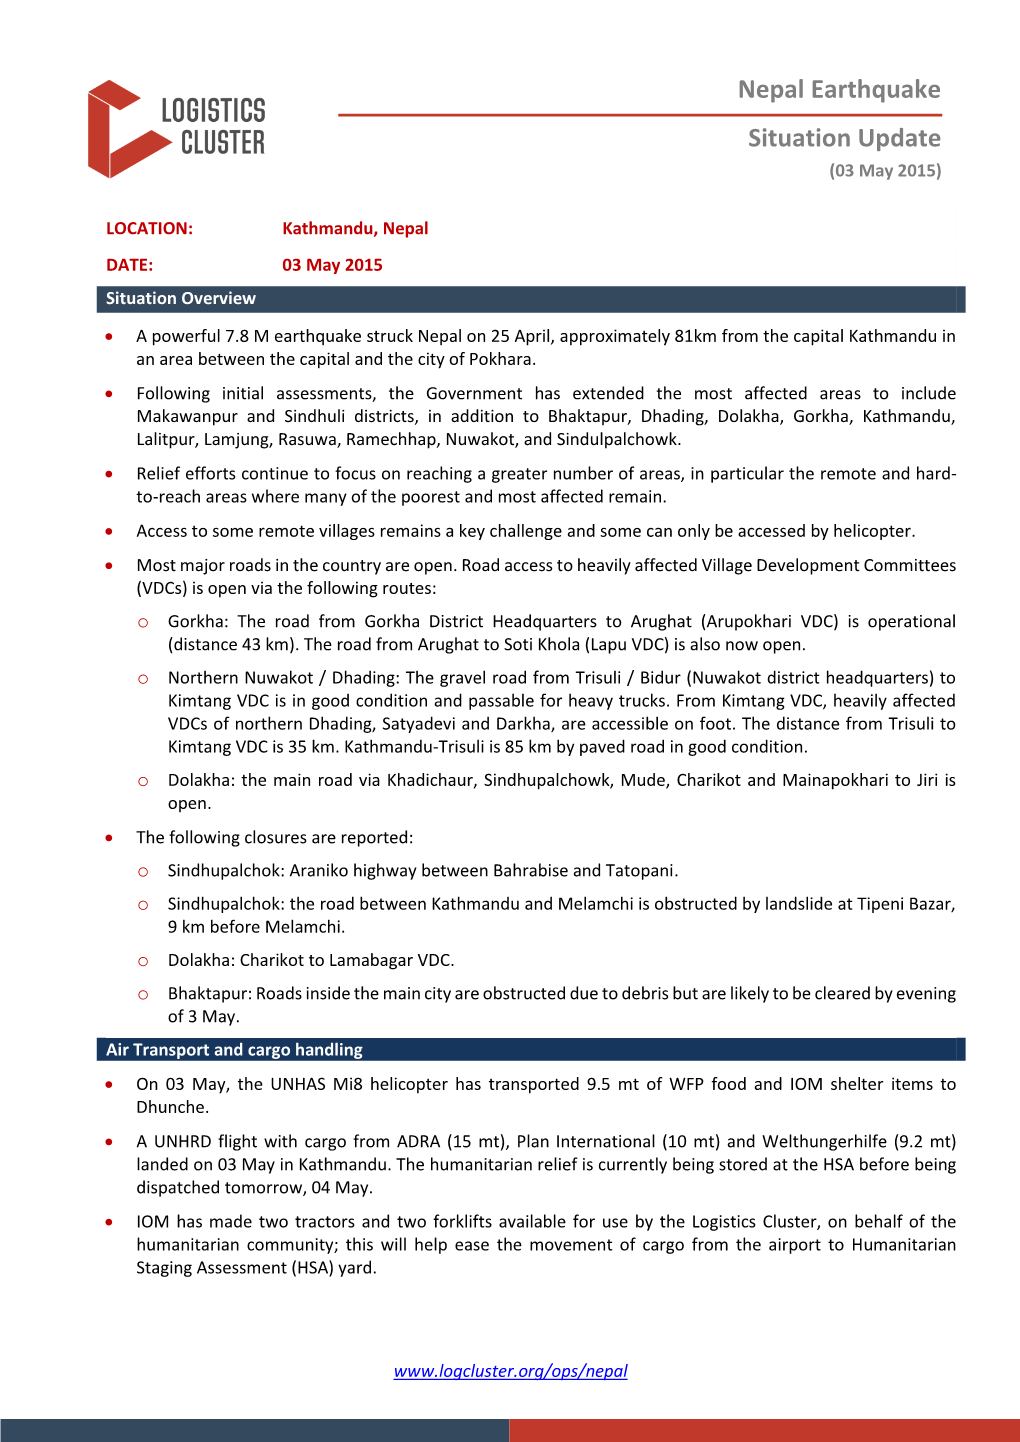 Nepal Earthquake Situation Update (03 May 2015)